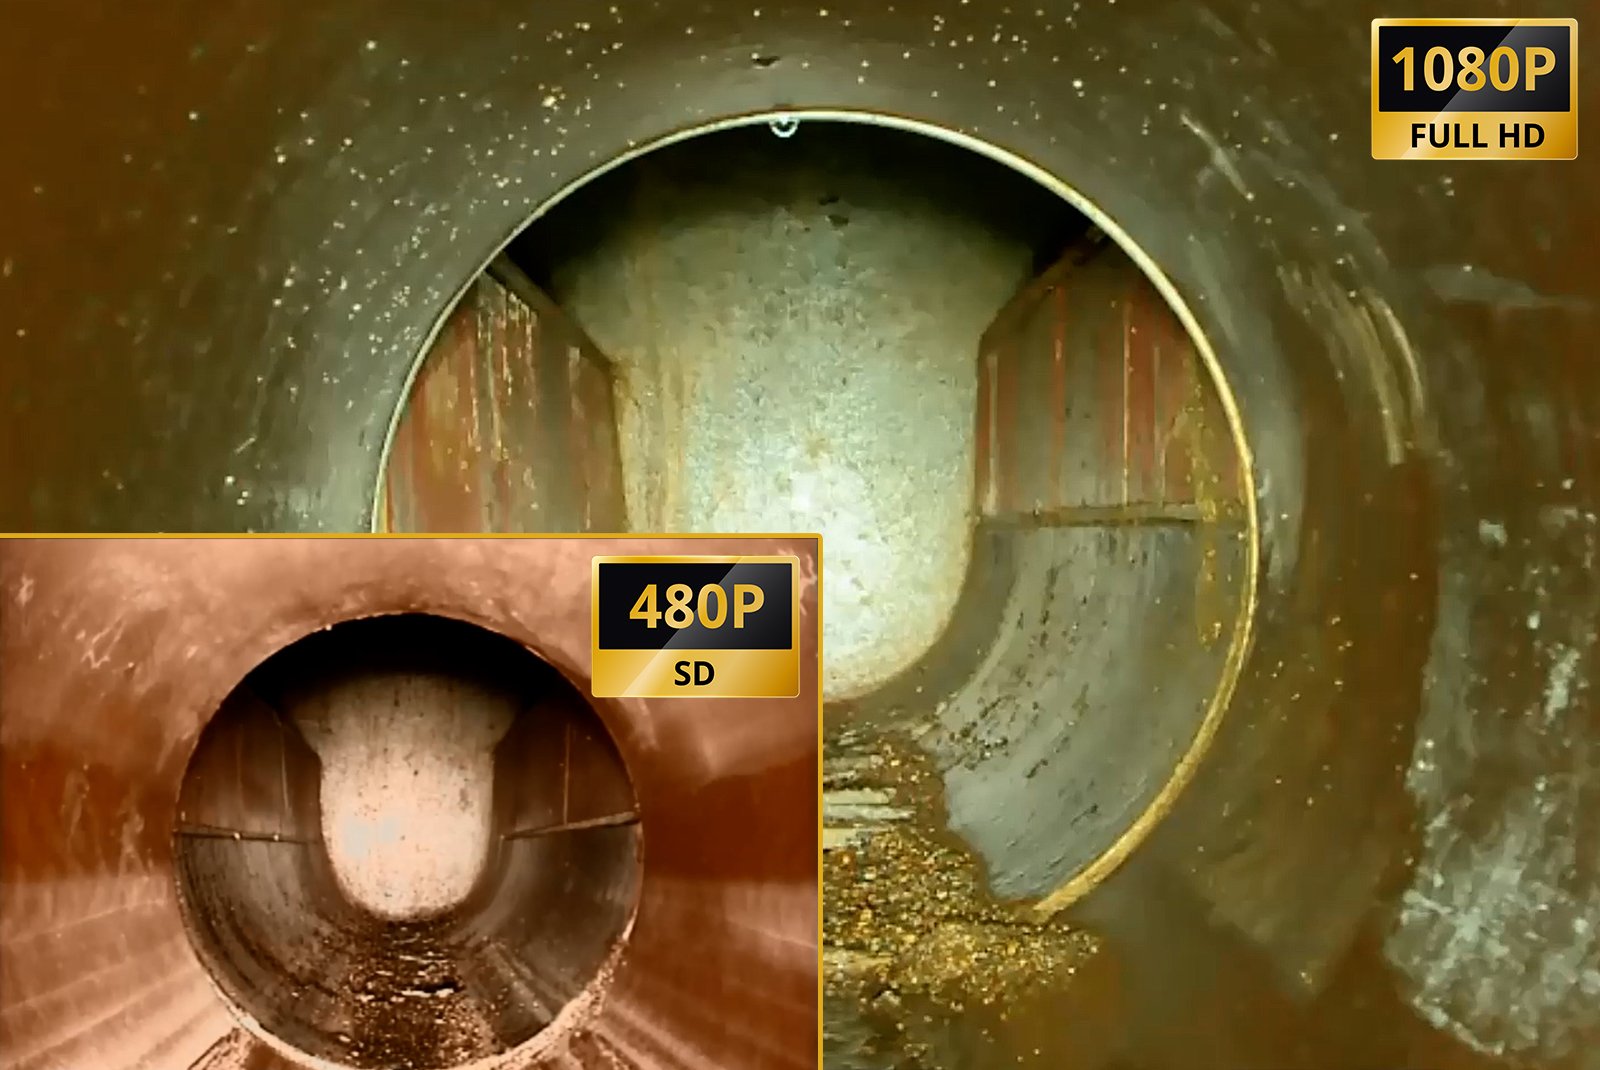 SD and HD comparision from pipe inspection cameras